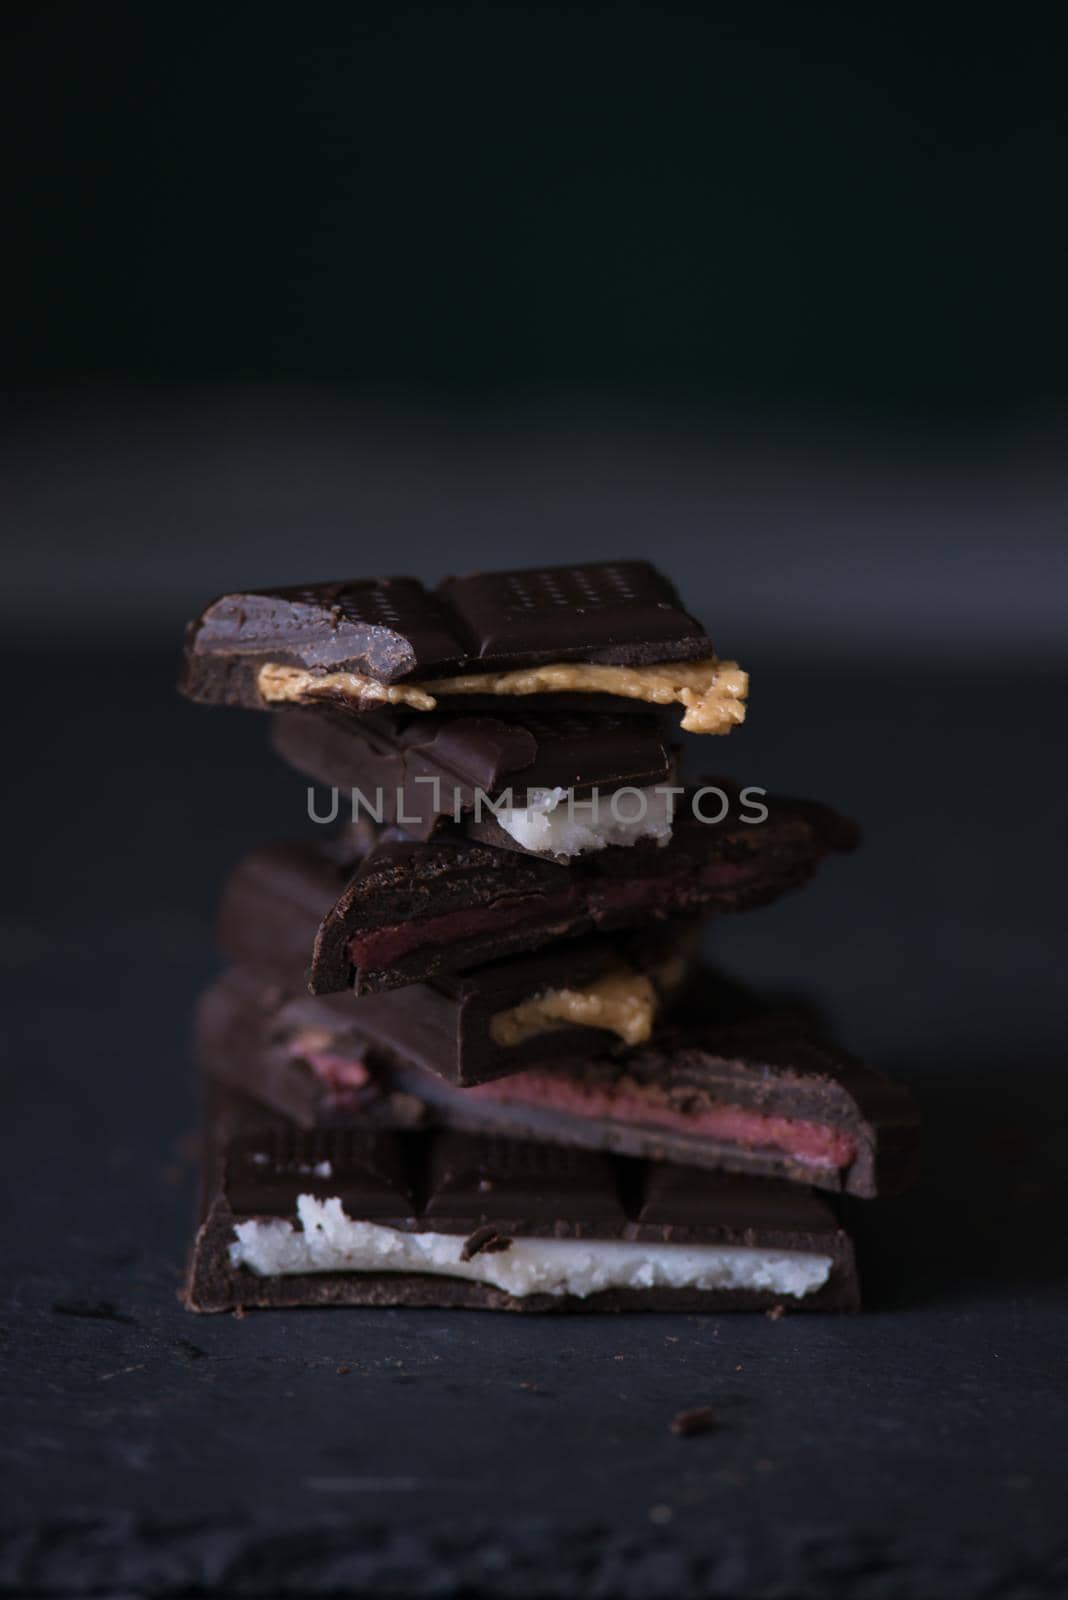 variety of homemade chocolate with different fillings.dark food photo